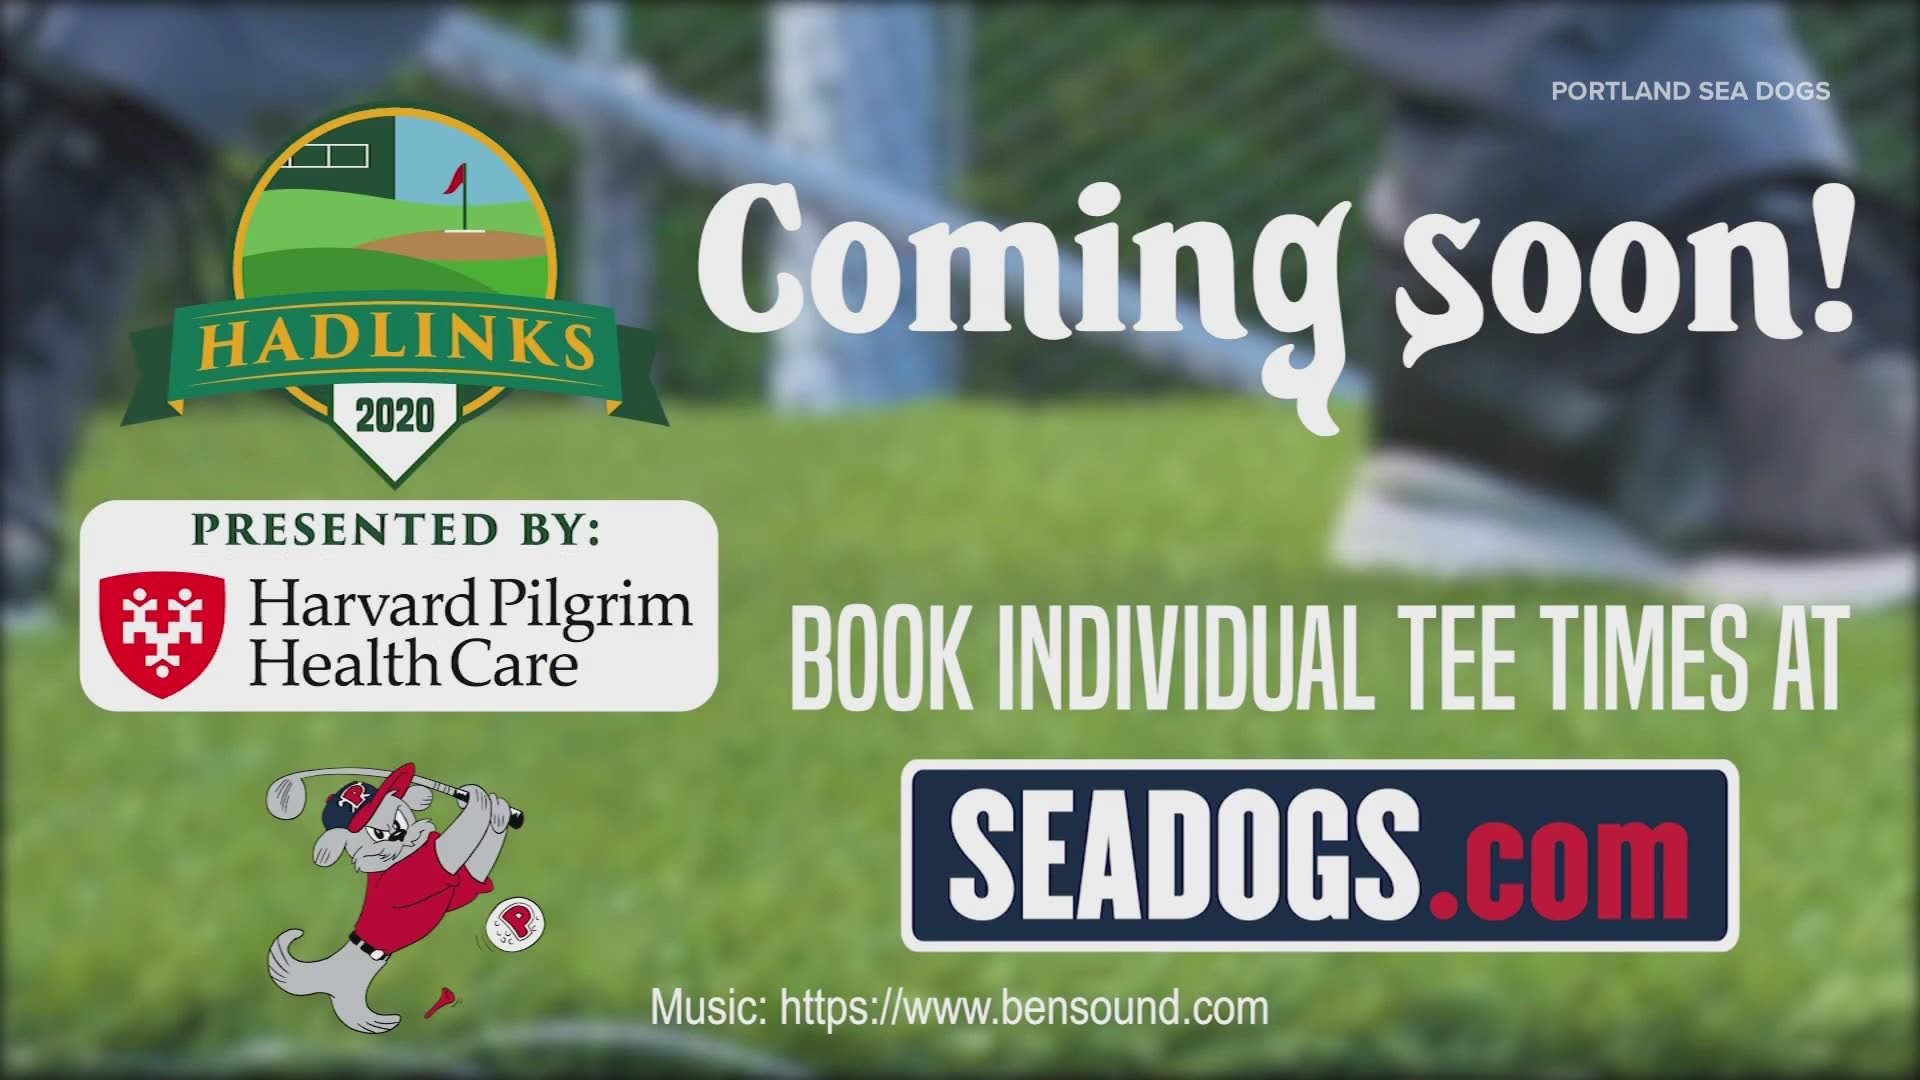 The Portland Sea Dogs are transforming Hadlock Field into a 9-hole golf course for four days in July.